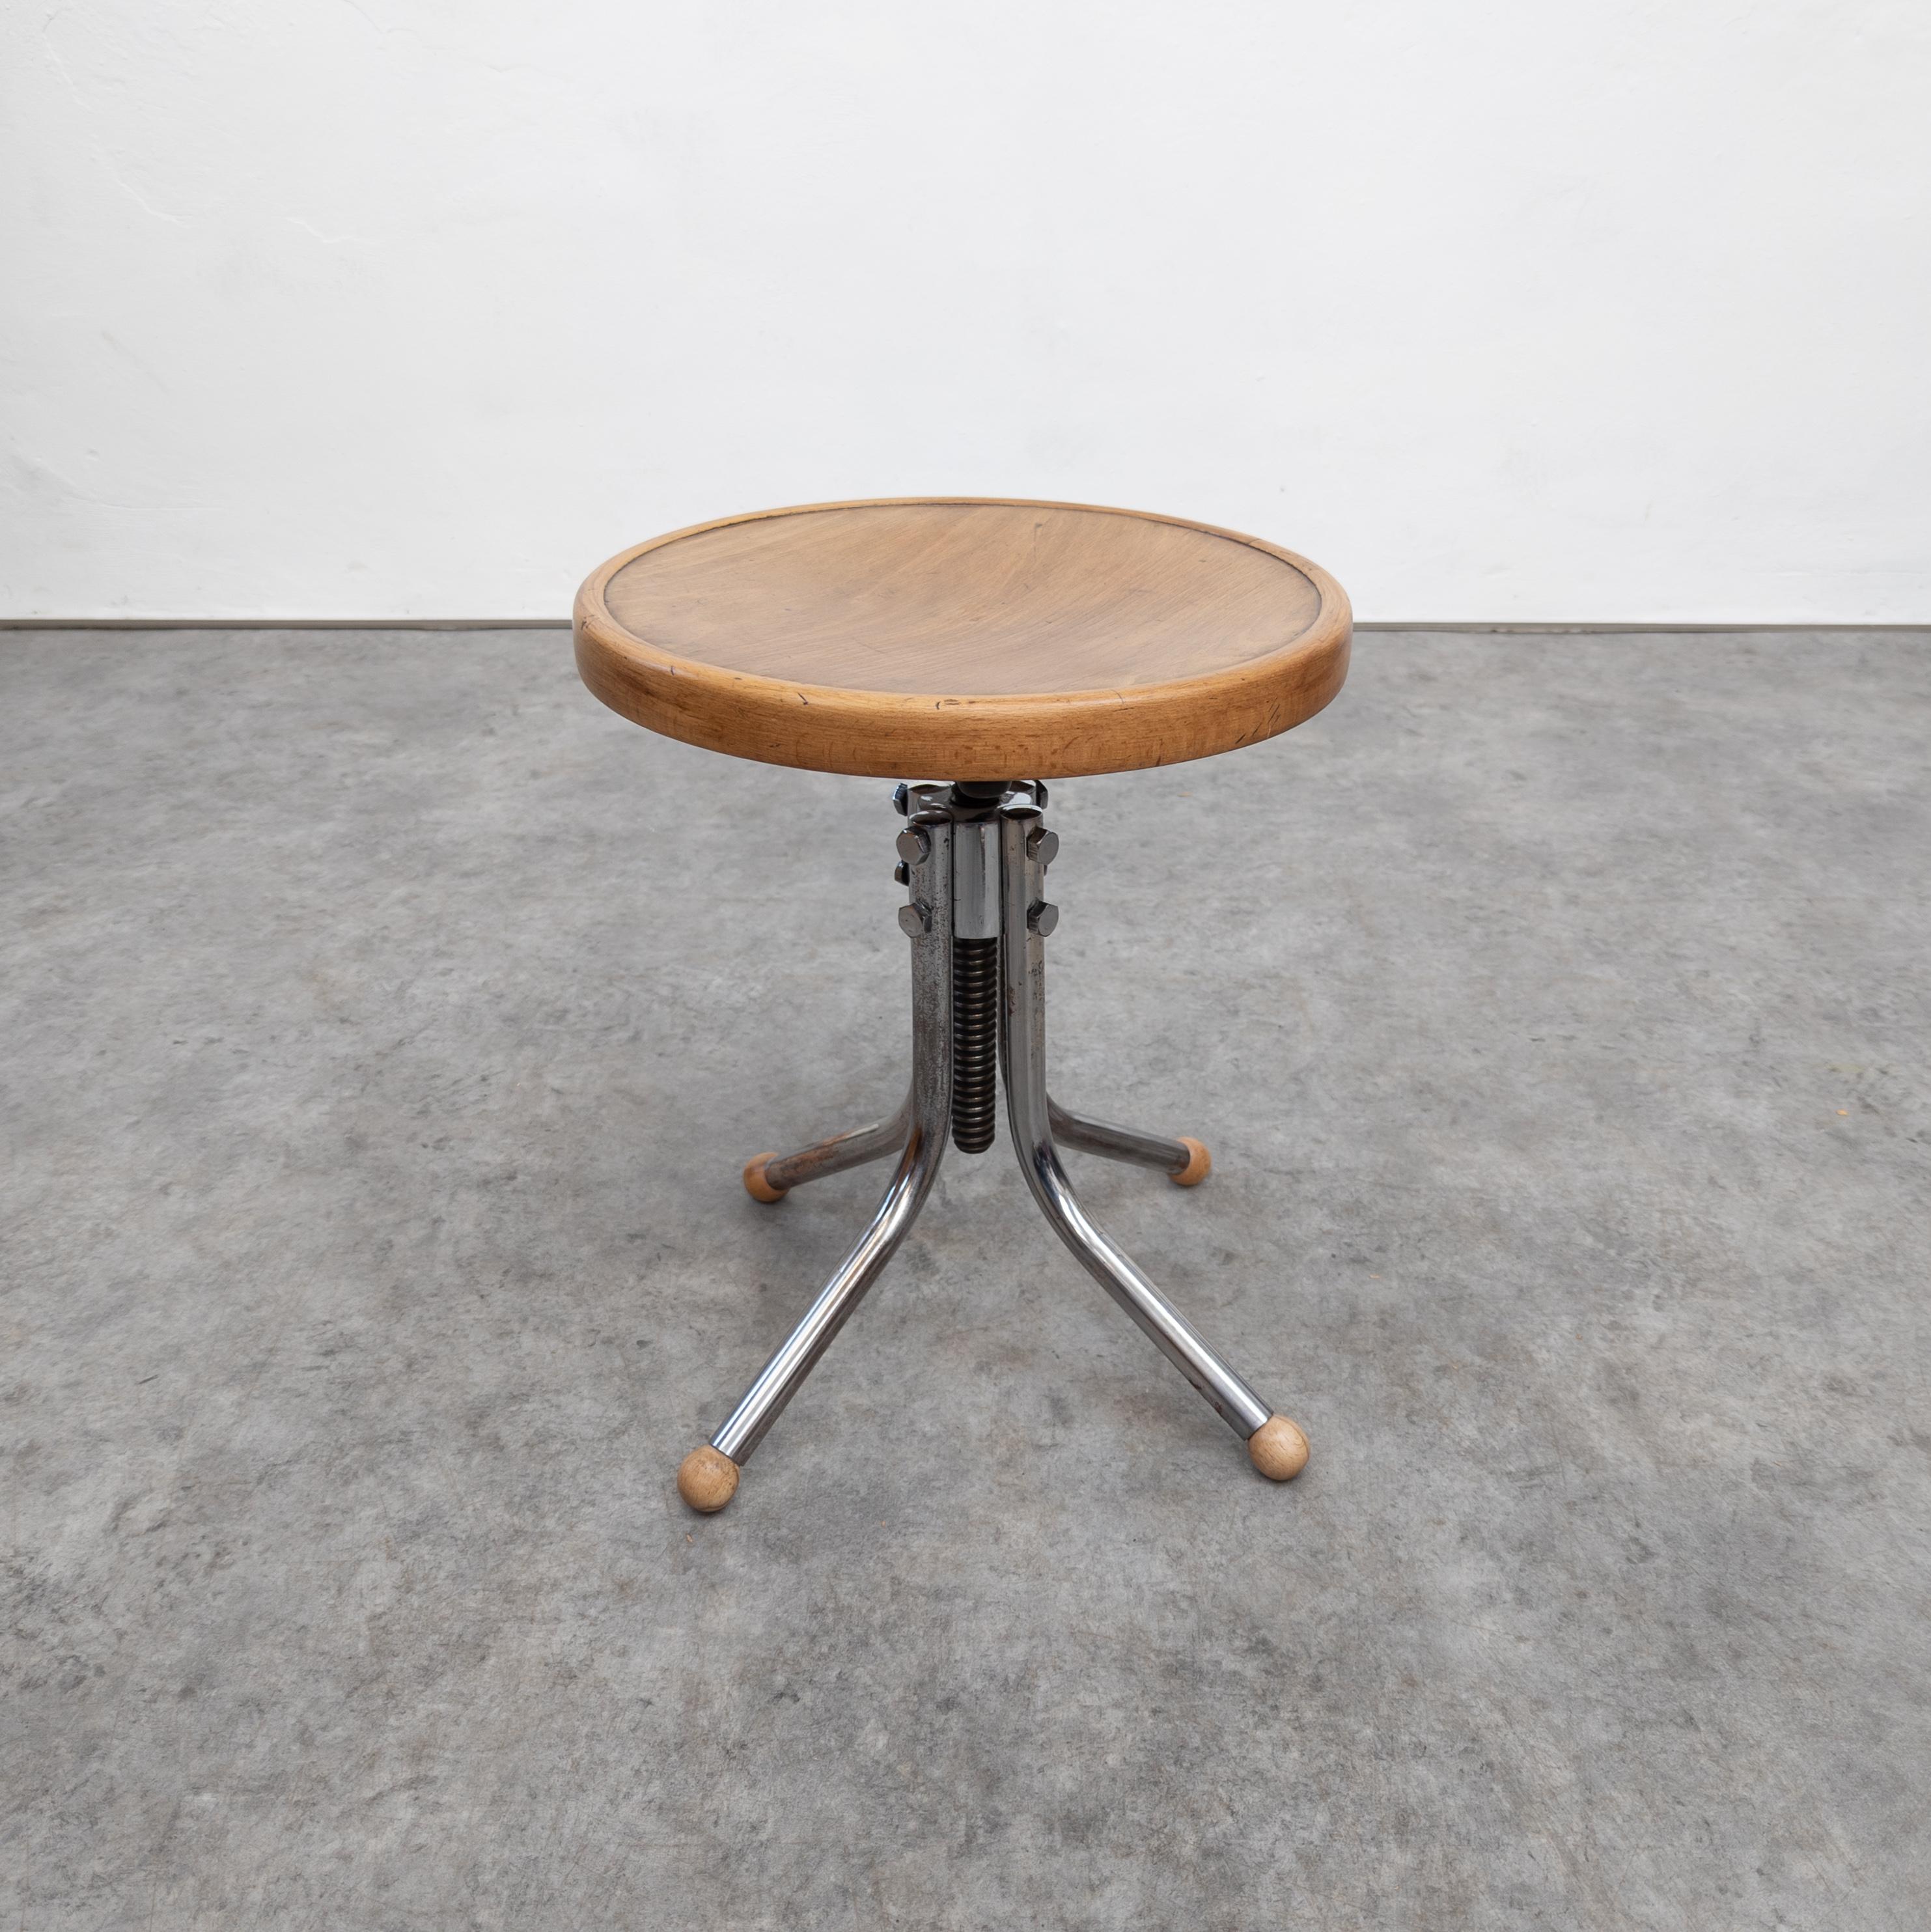 A rare variant of stool mod. no. B 195, designed by Marcel Breuer In Good Condition For Sale In PRAHA 5, CZ